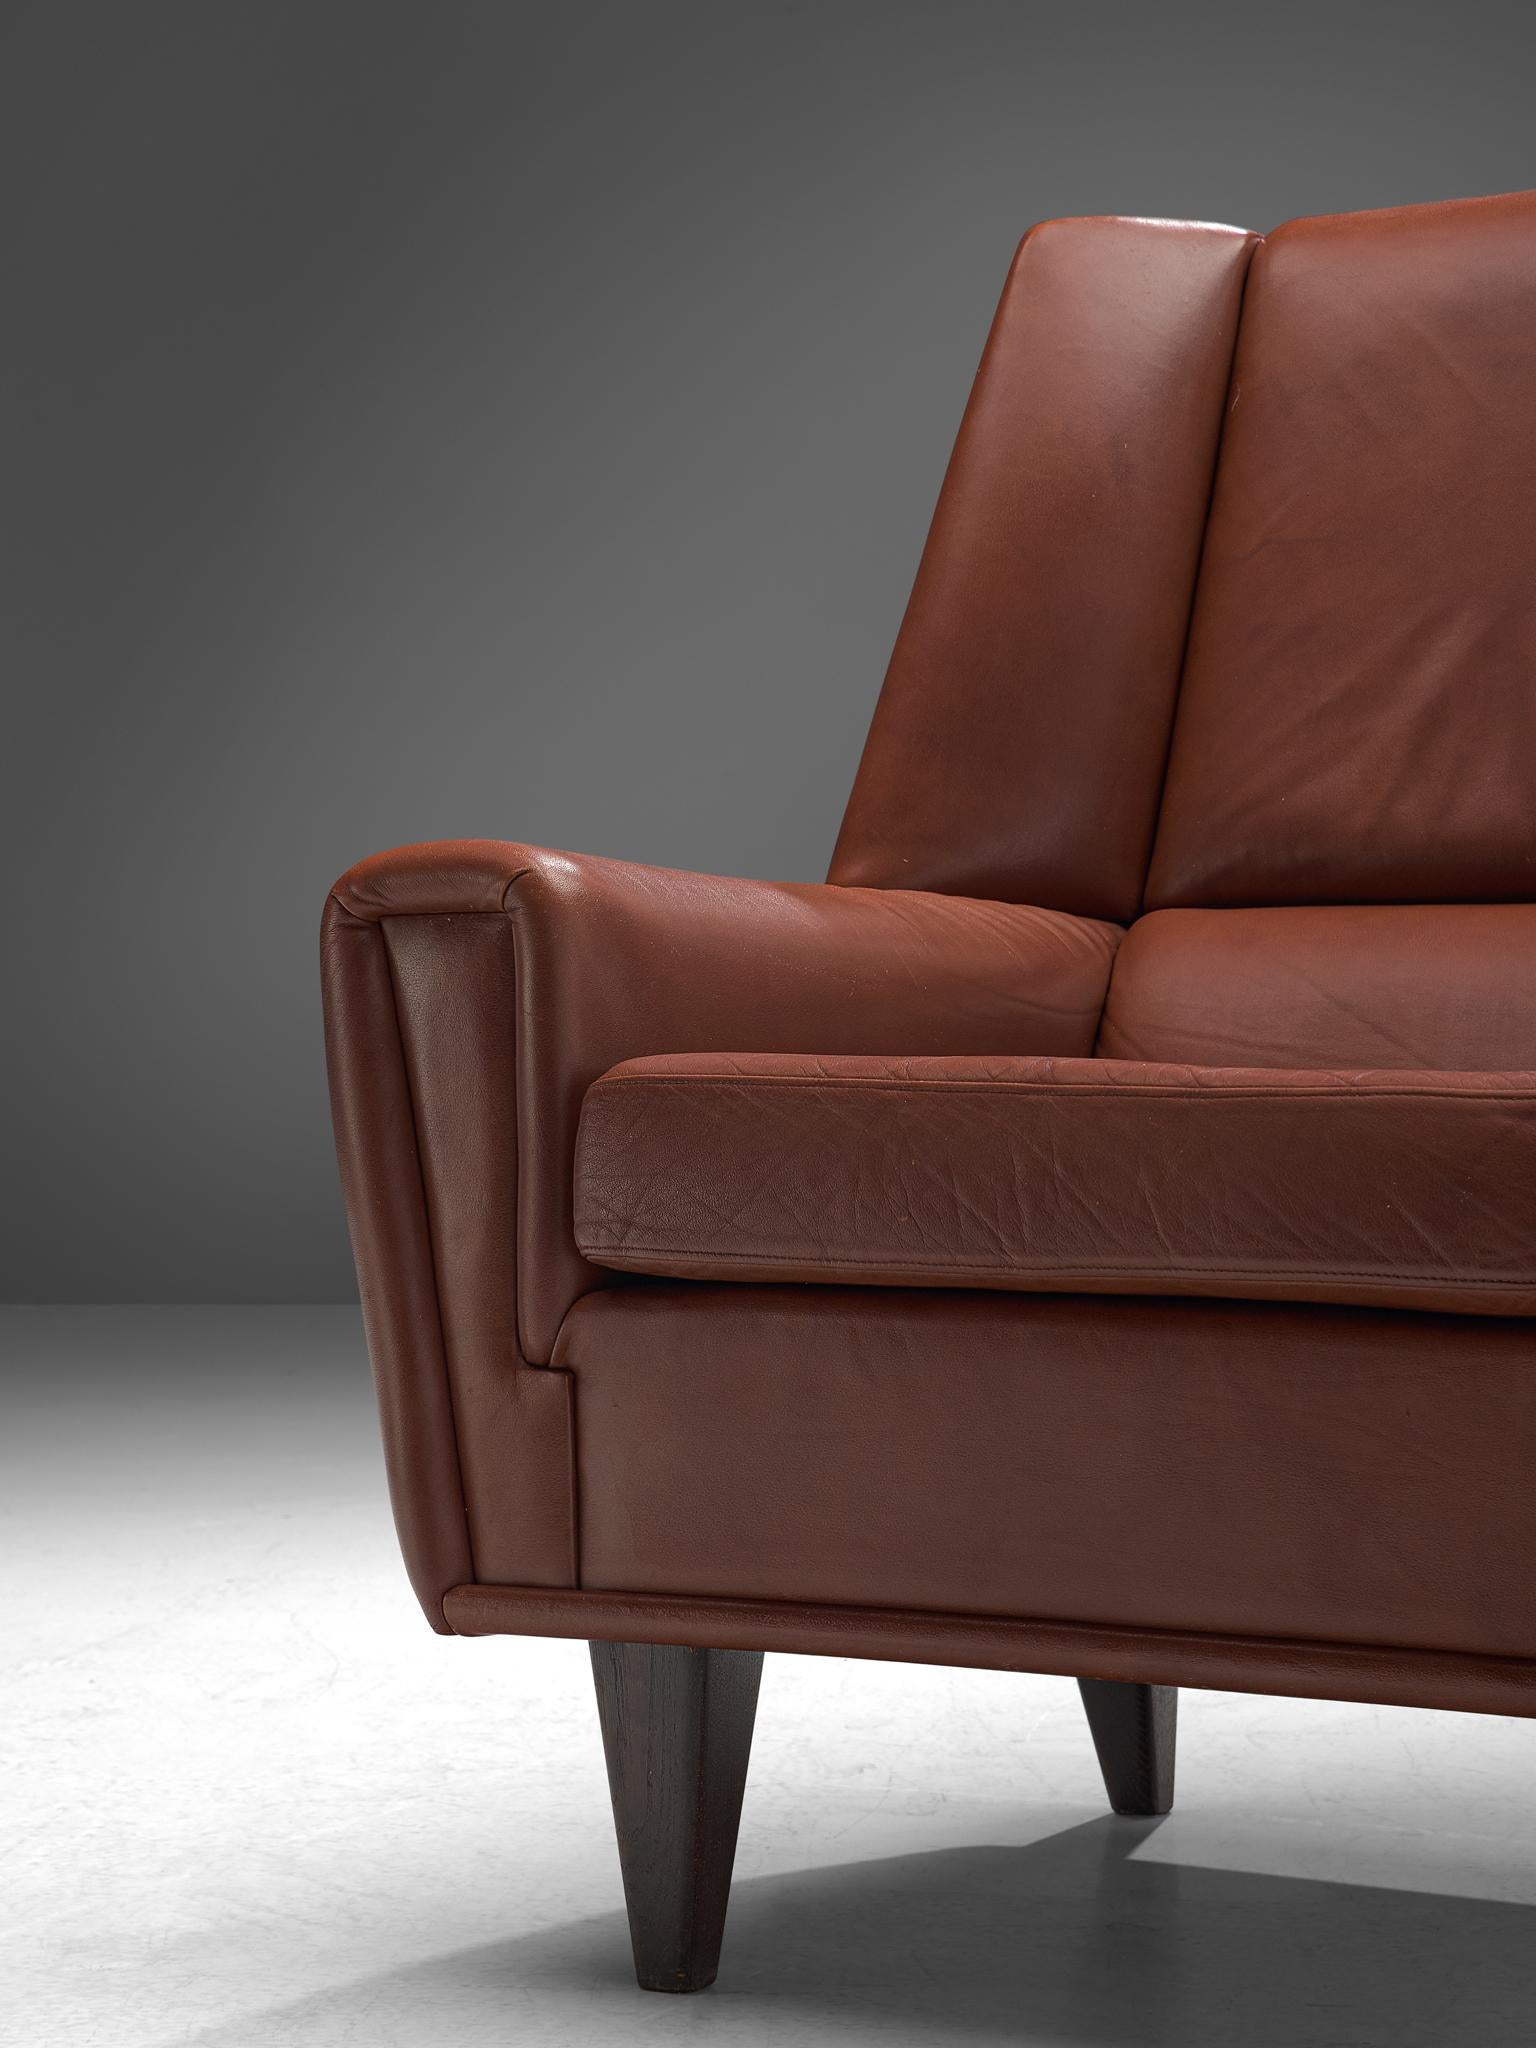 Mid-20th Century Danish Lounge Chair with Ottoman in Brown Cognac Leather, circa 1960